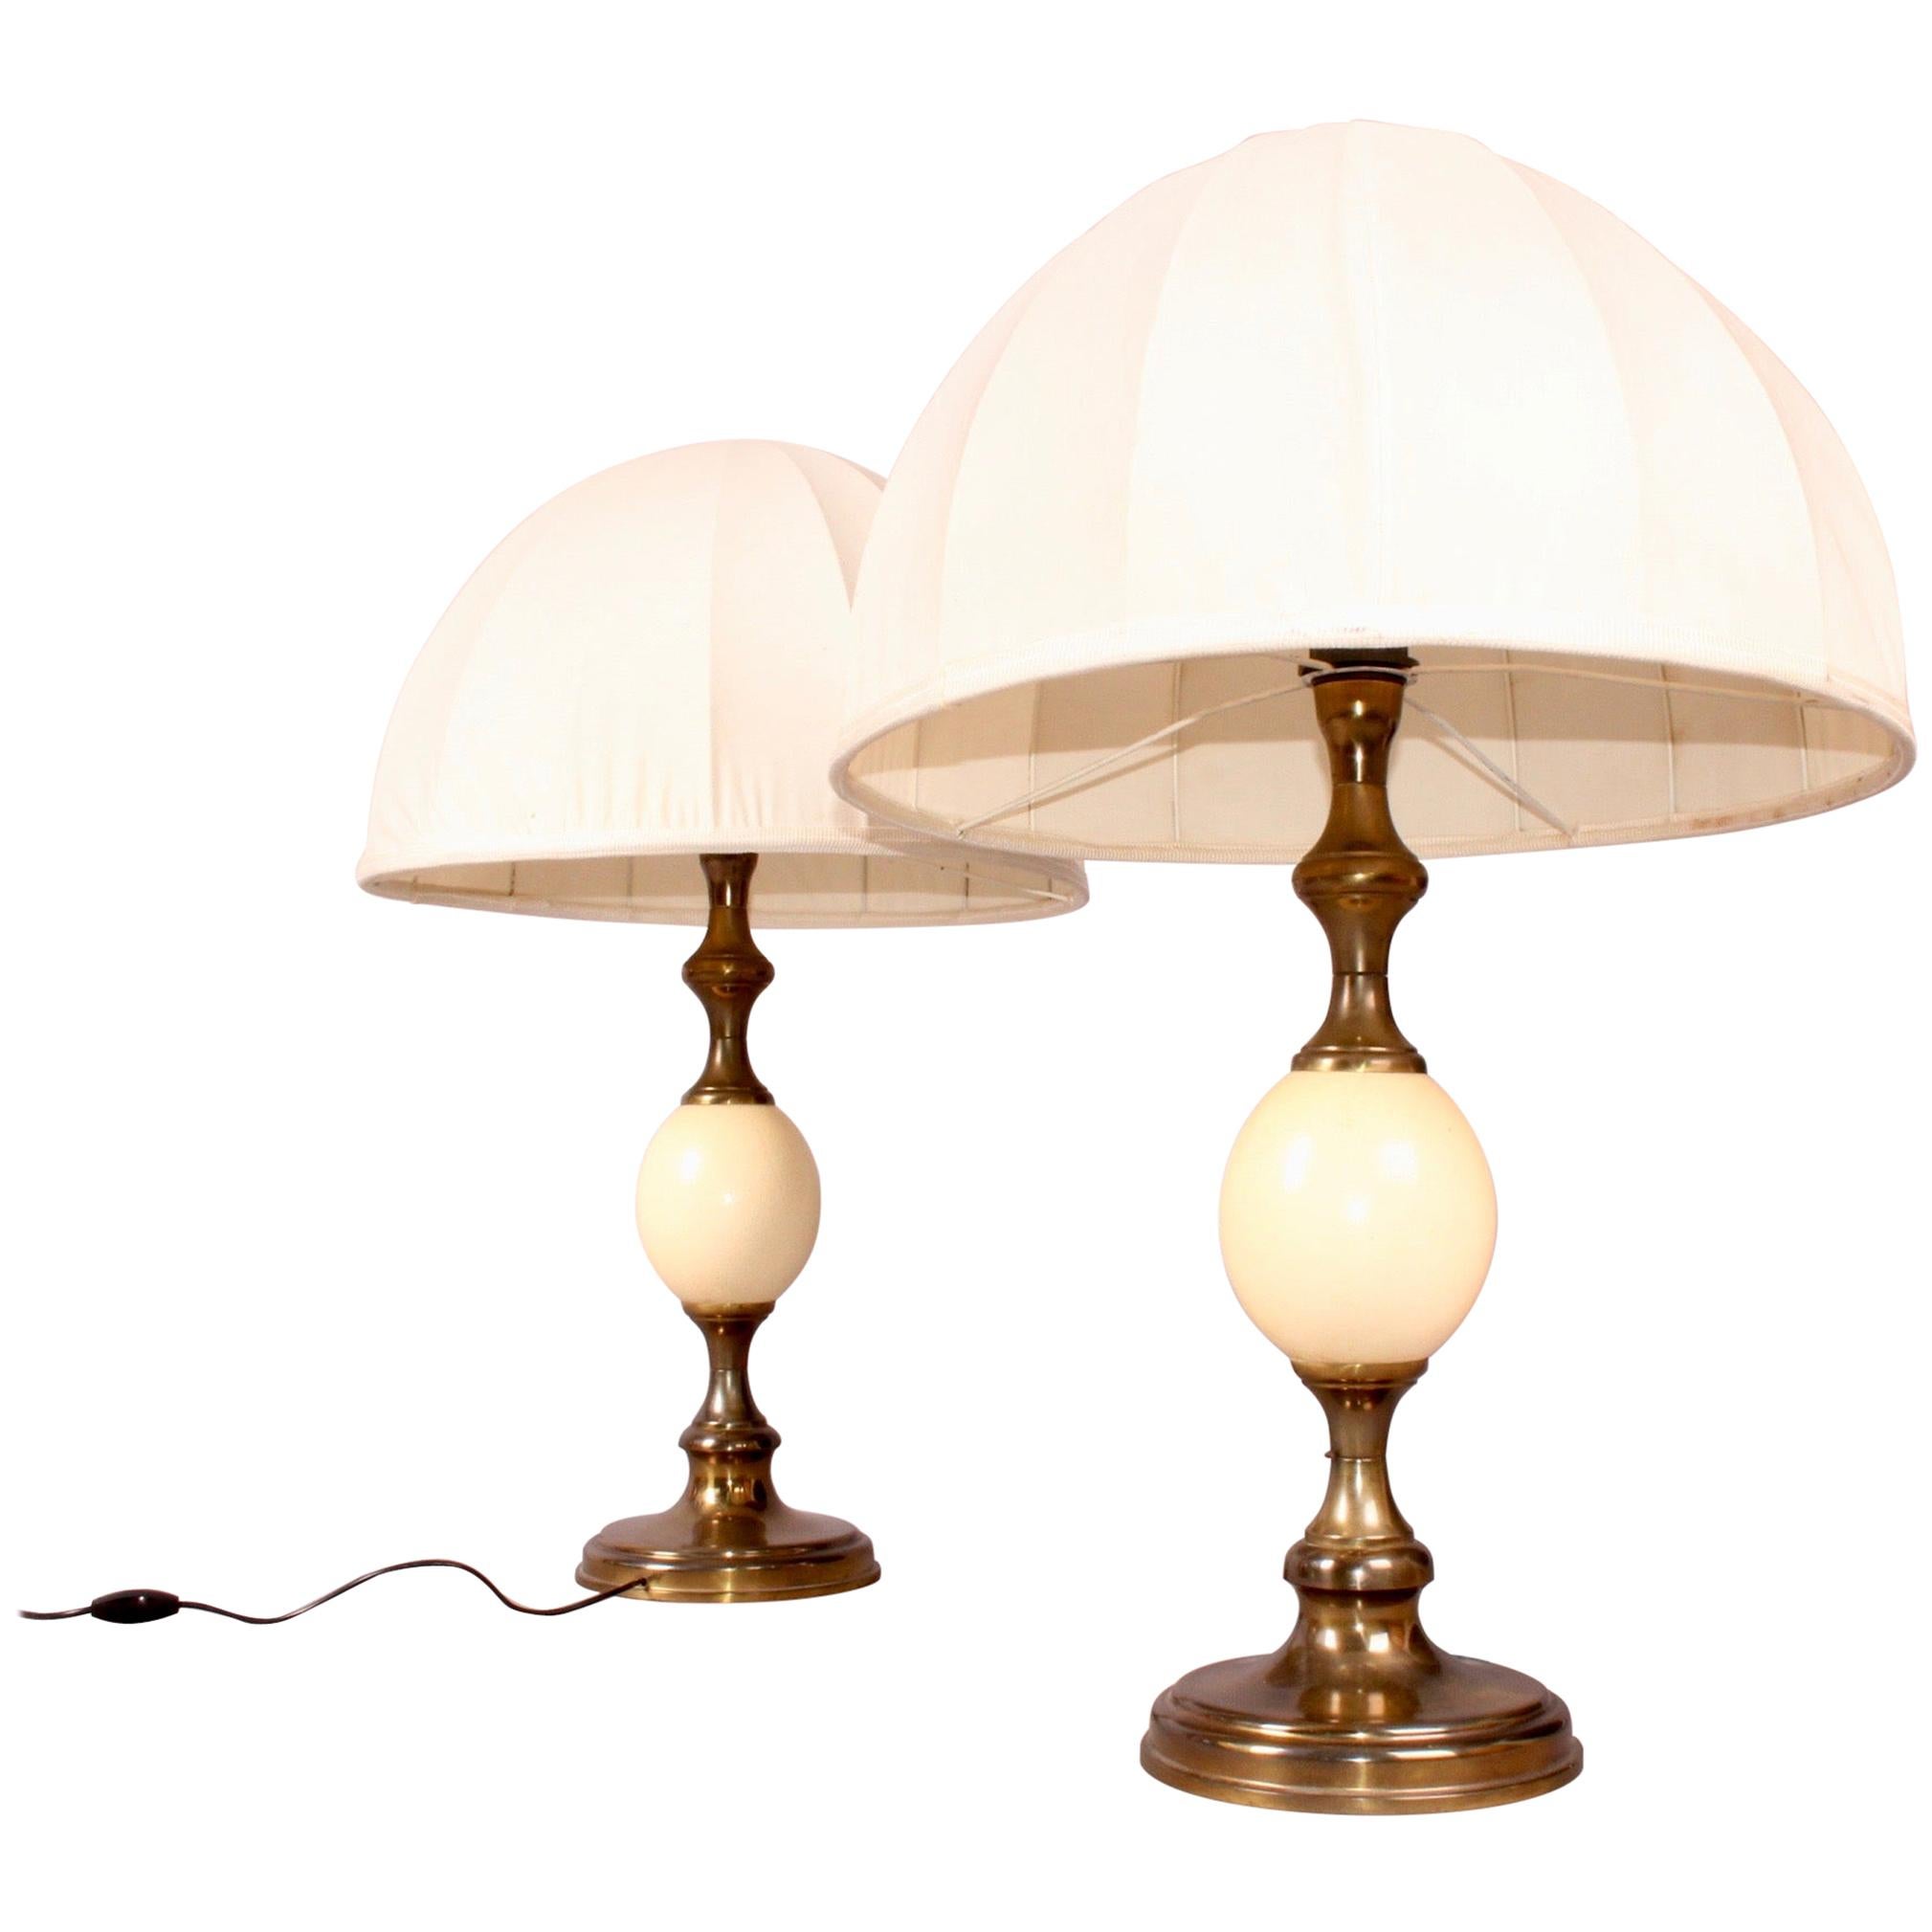 Pair of Ostrich Egg and Brass Table Lamp